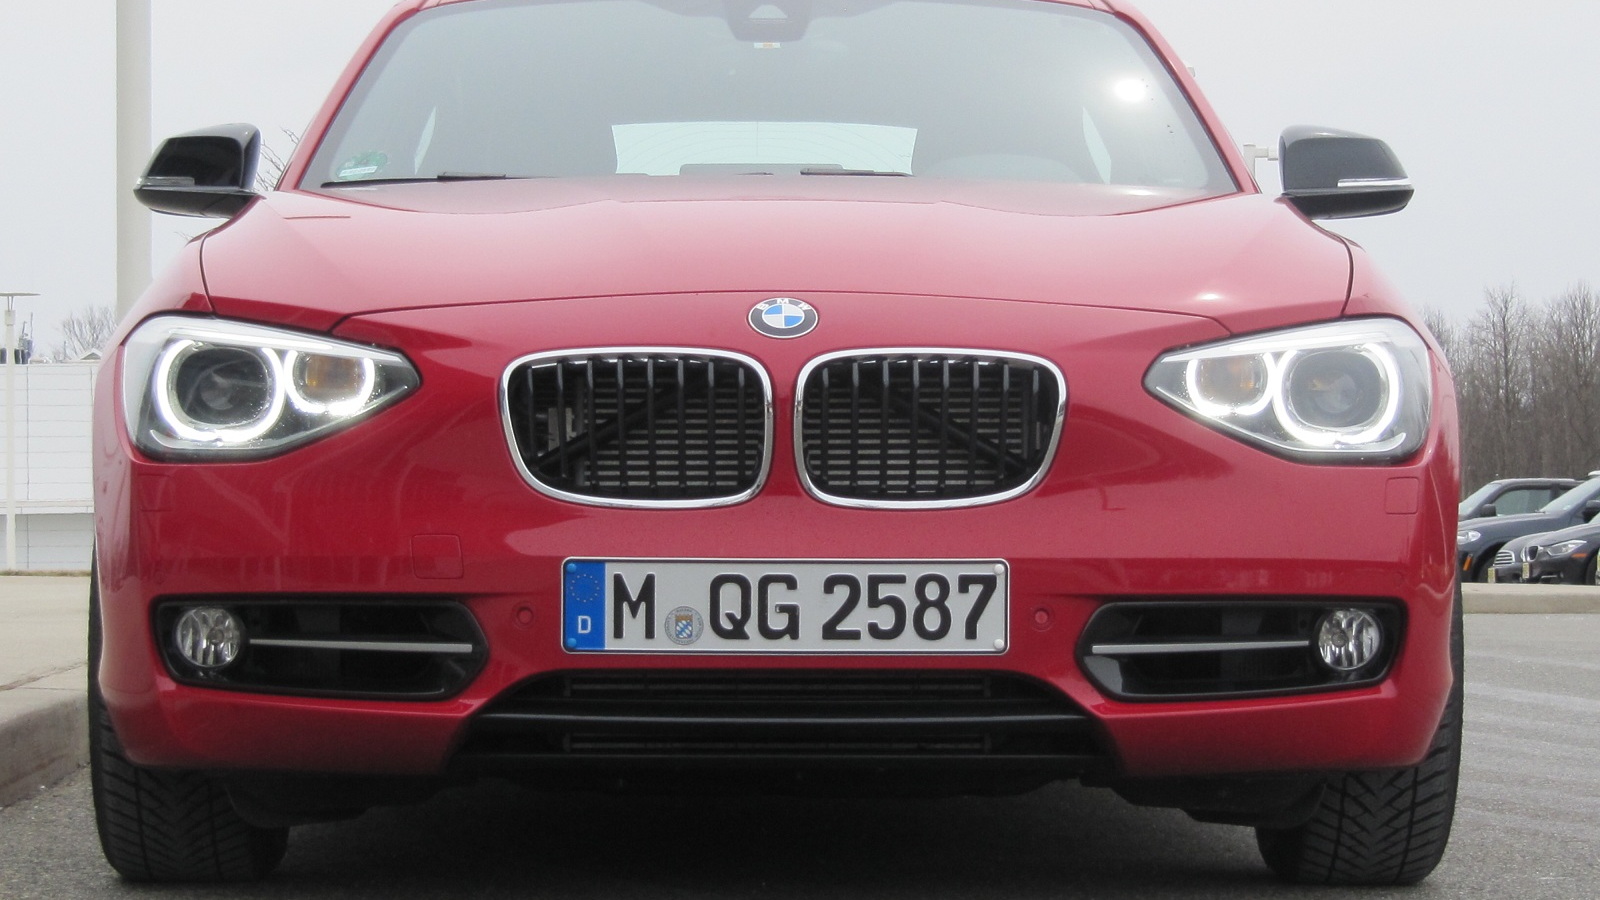 BMW 1-Series (European model) fitted with prototype 1.5-liter 3-cylinder engine